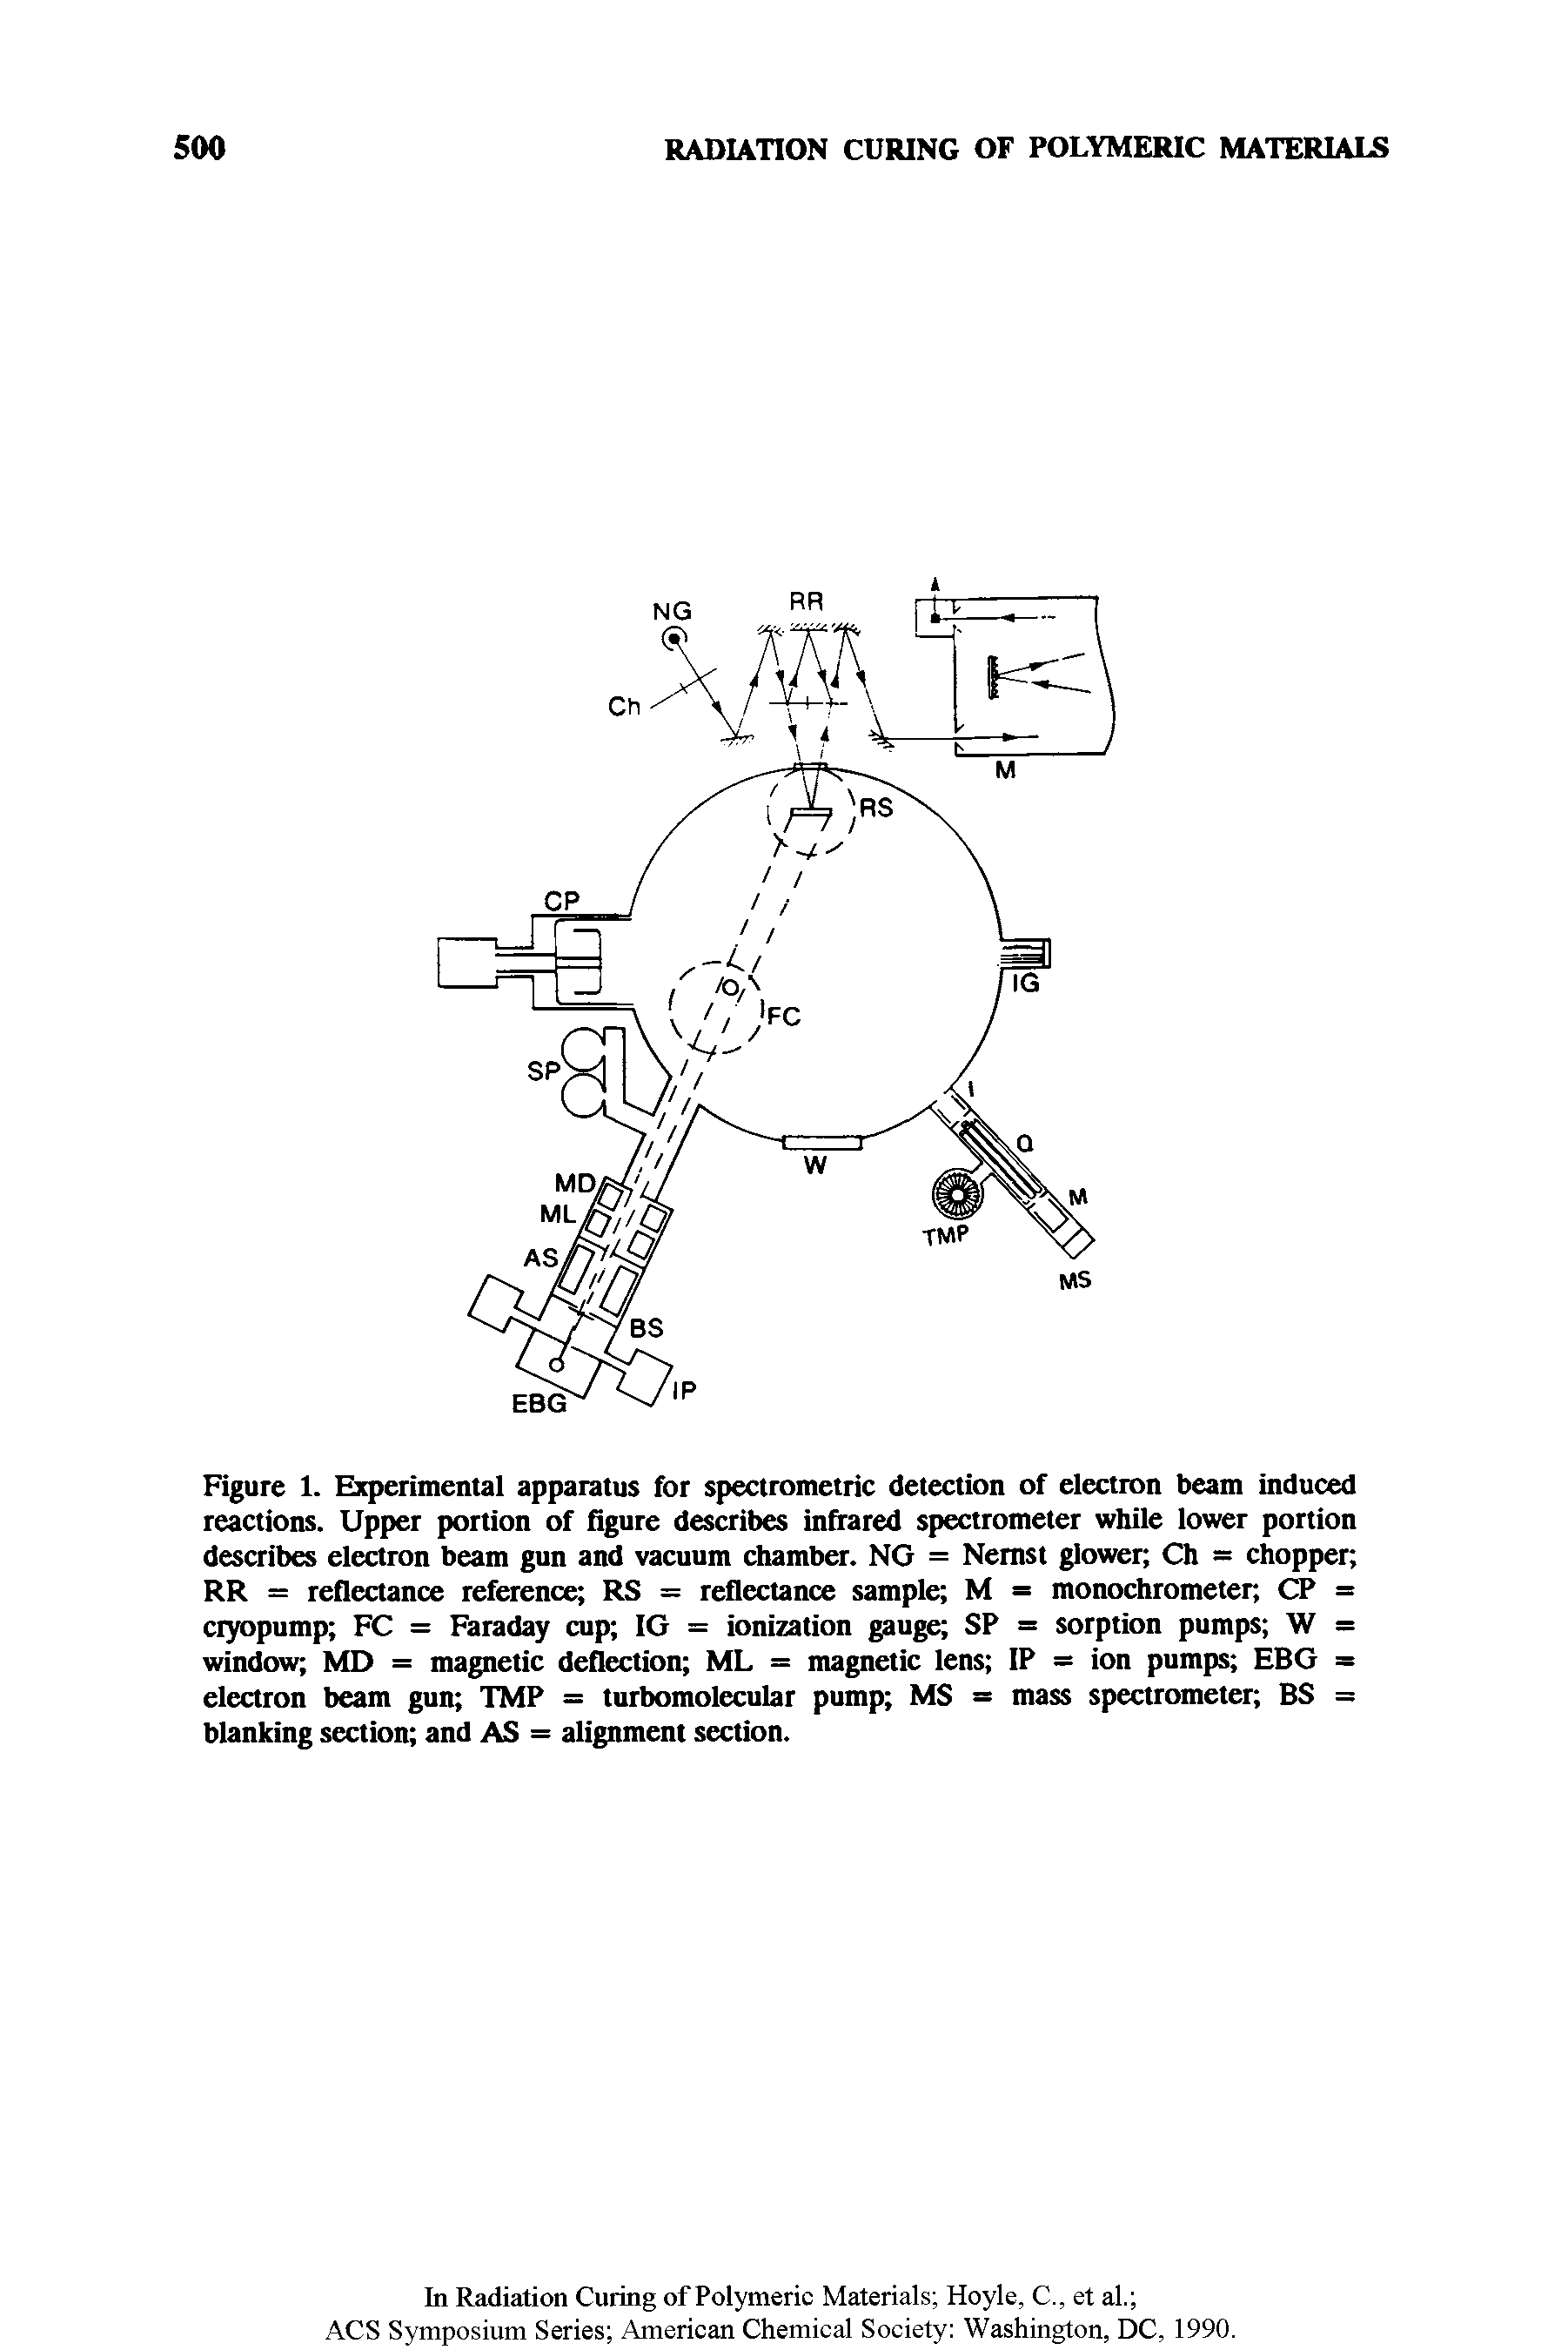 Figure 1. Experimental apparatus for spectrometric detection of electron beam induced reactions. Upper portion of figure describes infirared spectrometer while lower portion describes electron beam gun and vacuum chamber. NG = Nemst glower Ch = chopper RR = reflectance reference RS = reflectance sample M monochrometer, CP =...